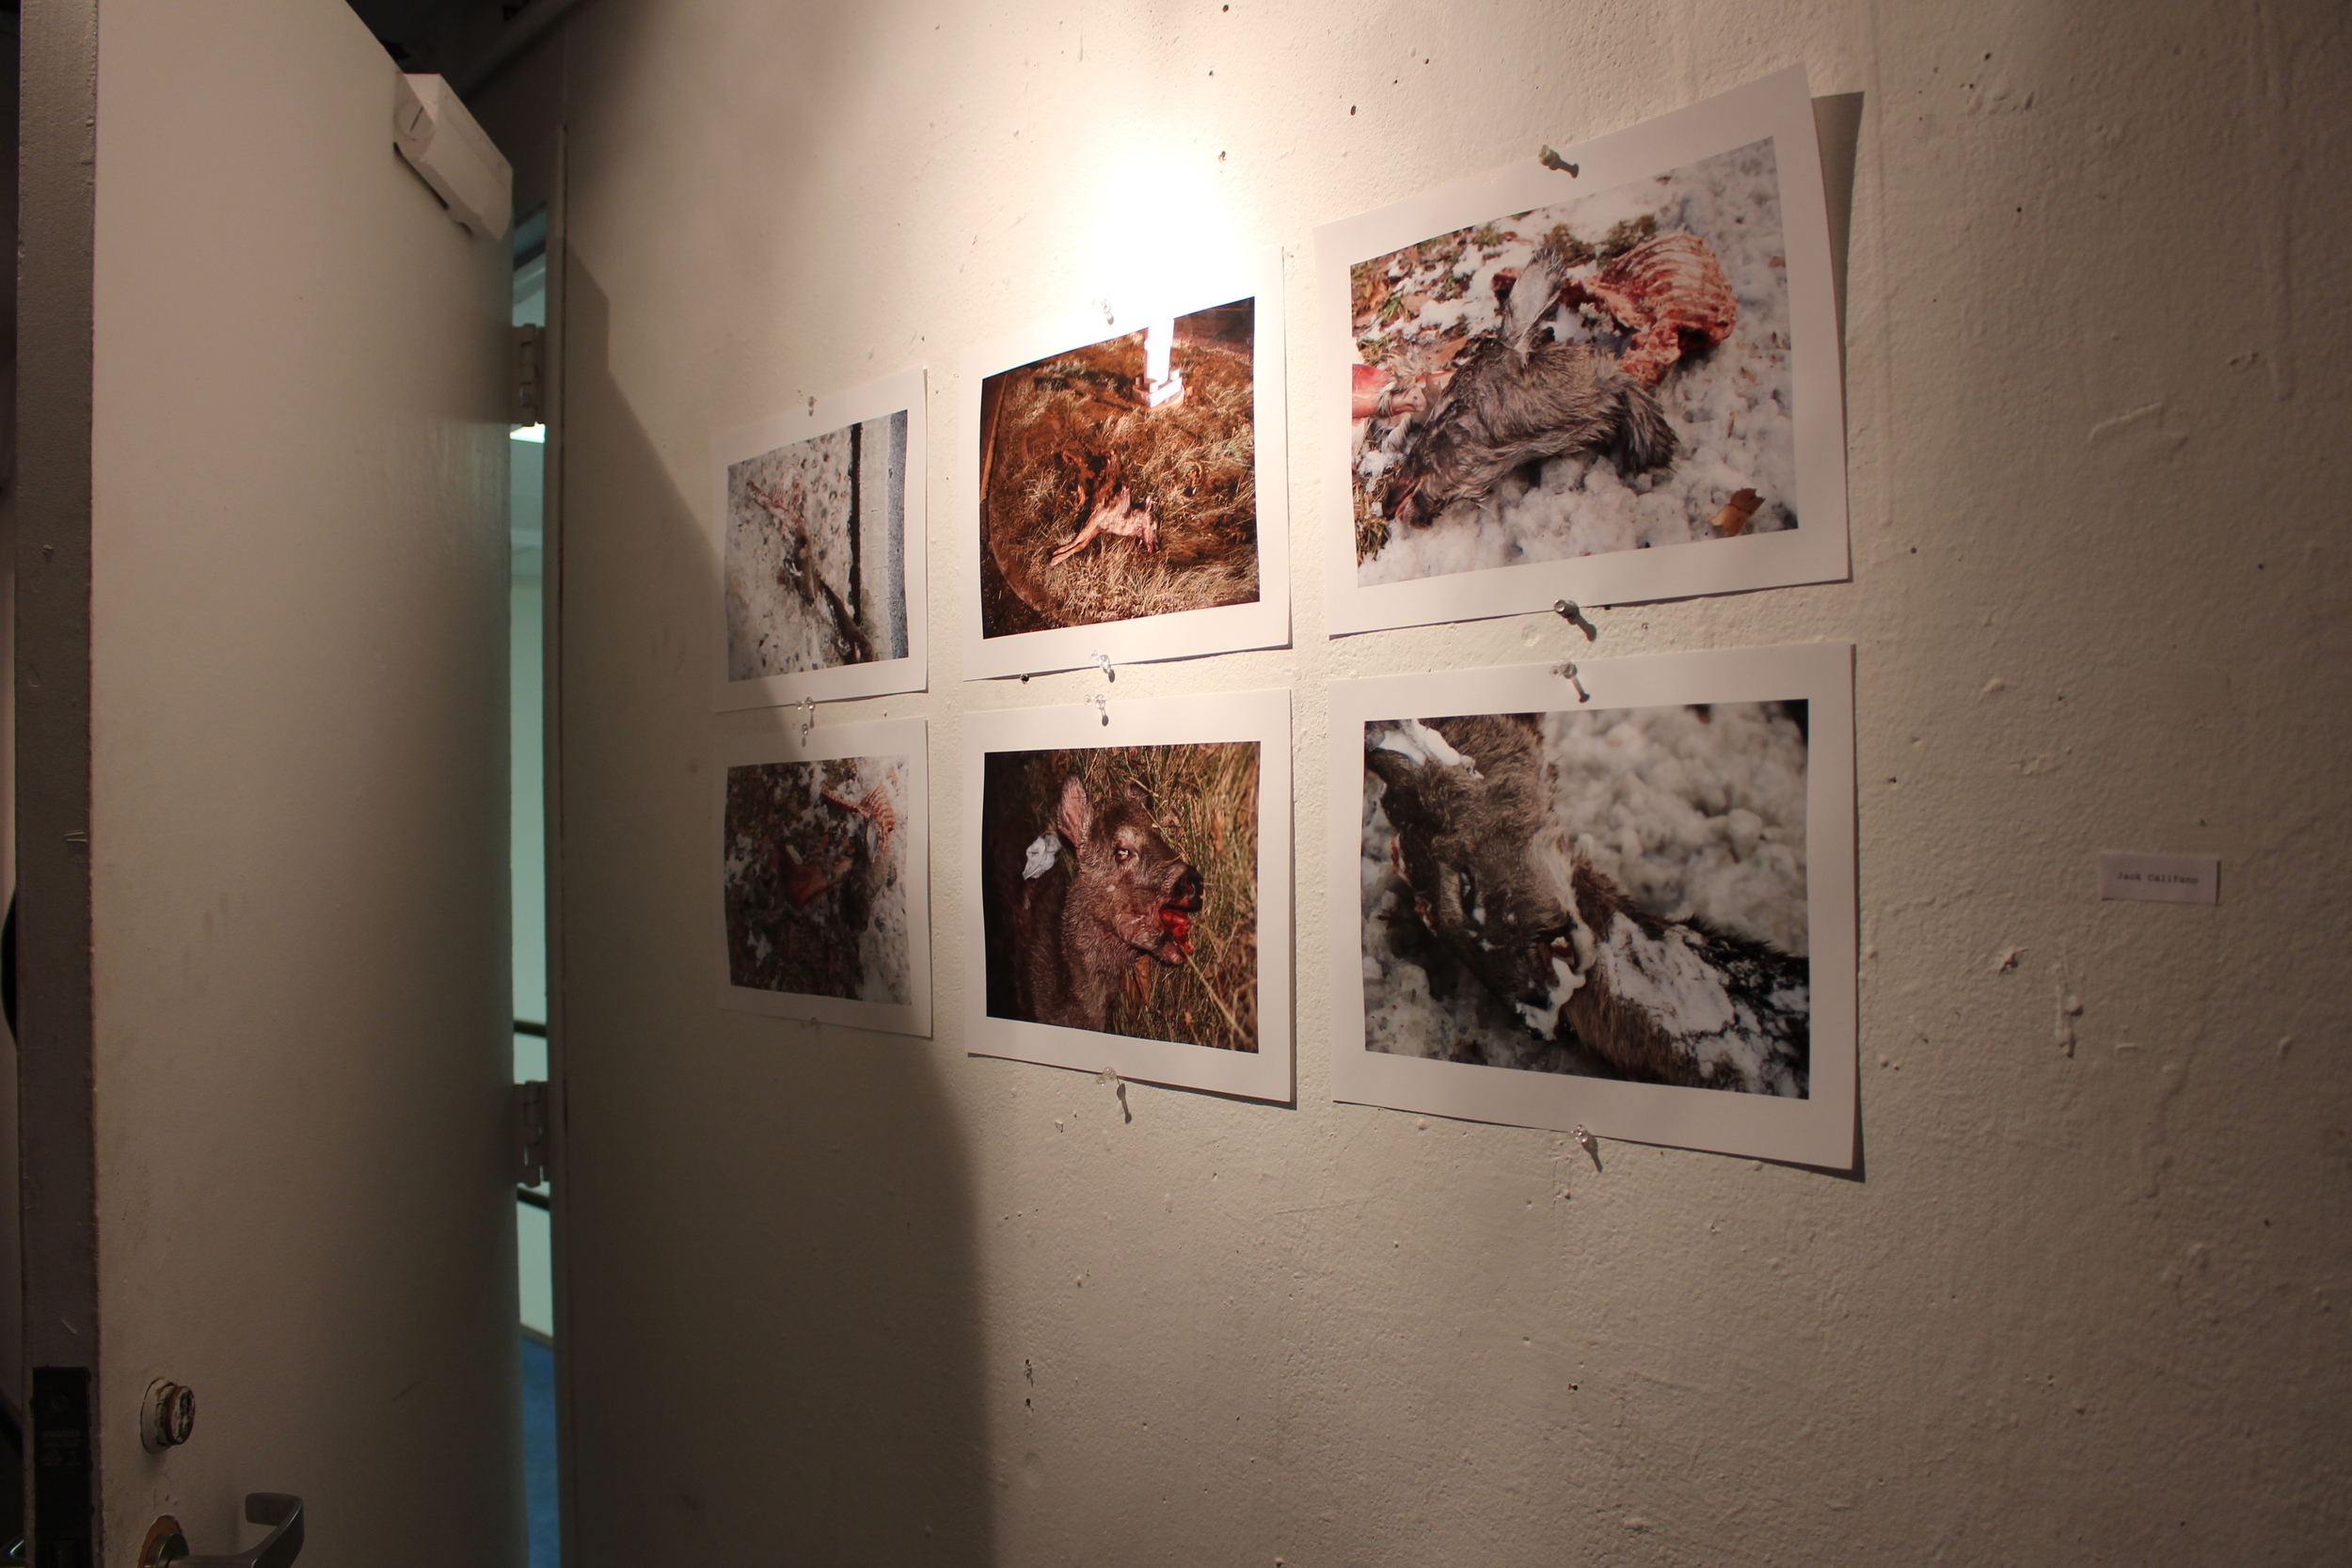   A display of photographs by Jack Califano '16, all depicting various animal carcasses. Photo by Lexie Brown '17  